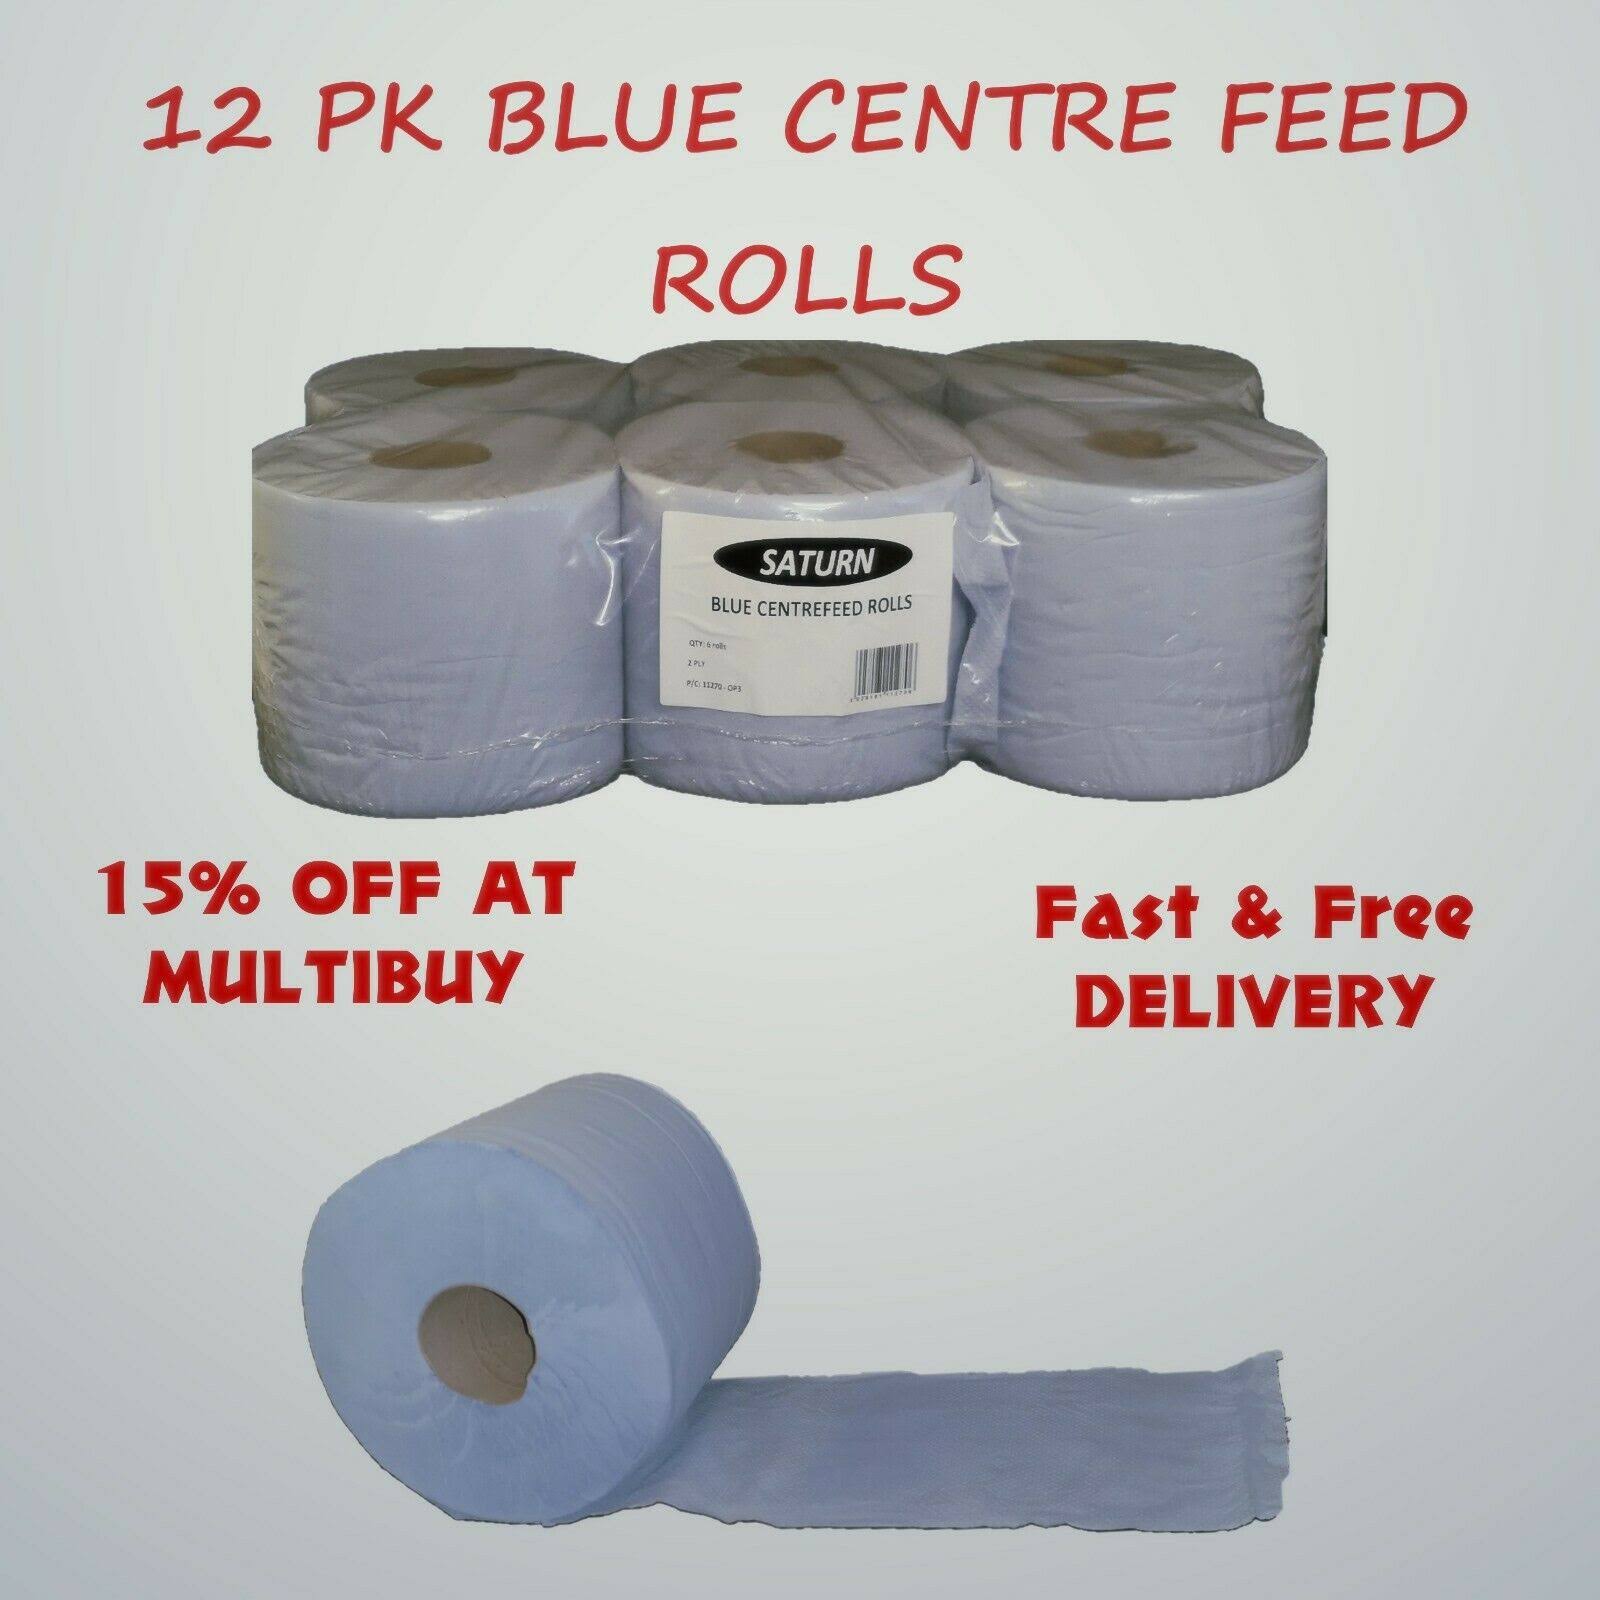 6 Pack Office Workshop Blue Hand Towels Rolls 2 Ply Centre Feed Rolls Wipes BLUE500